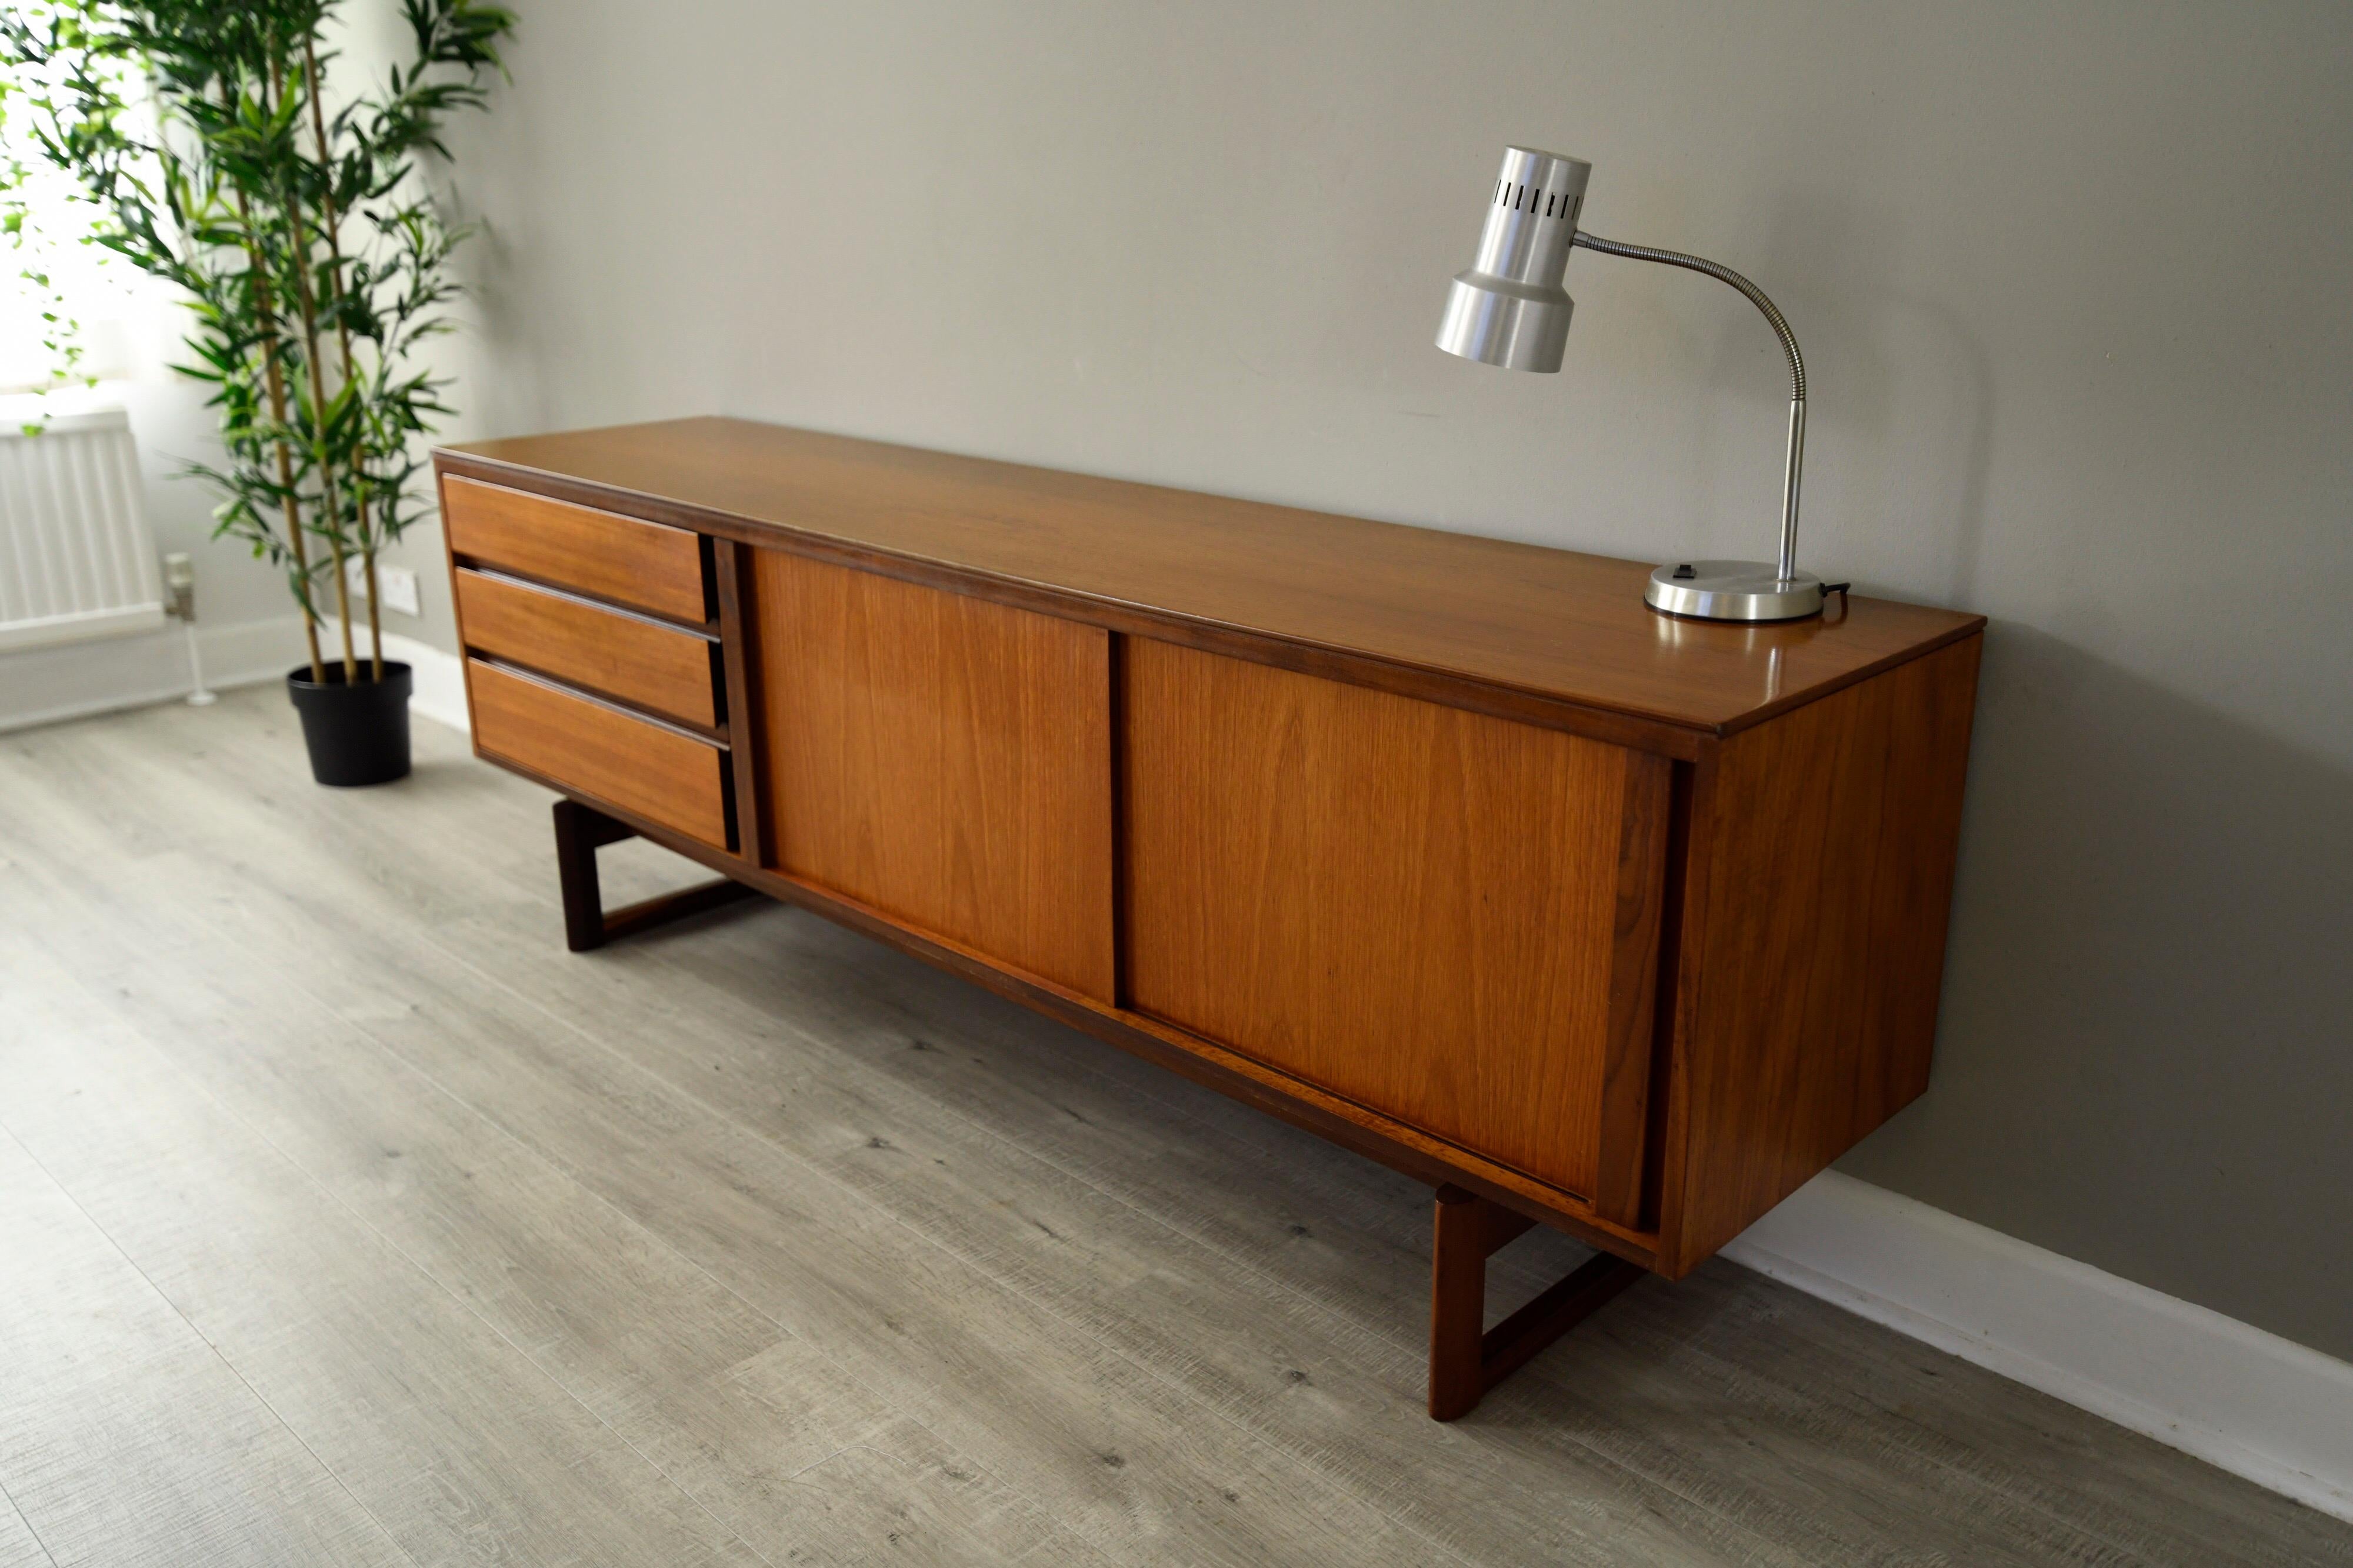 A stylish and strong linear form in this midcentury Classic teak sideboard by British furniture maker White & Newton based in Portsmouth under the design direction of Arthur Edwards.